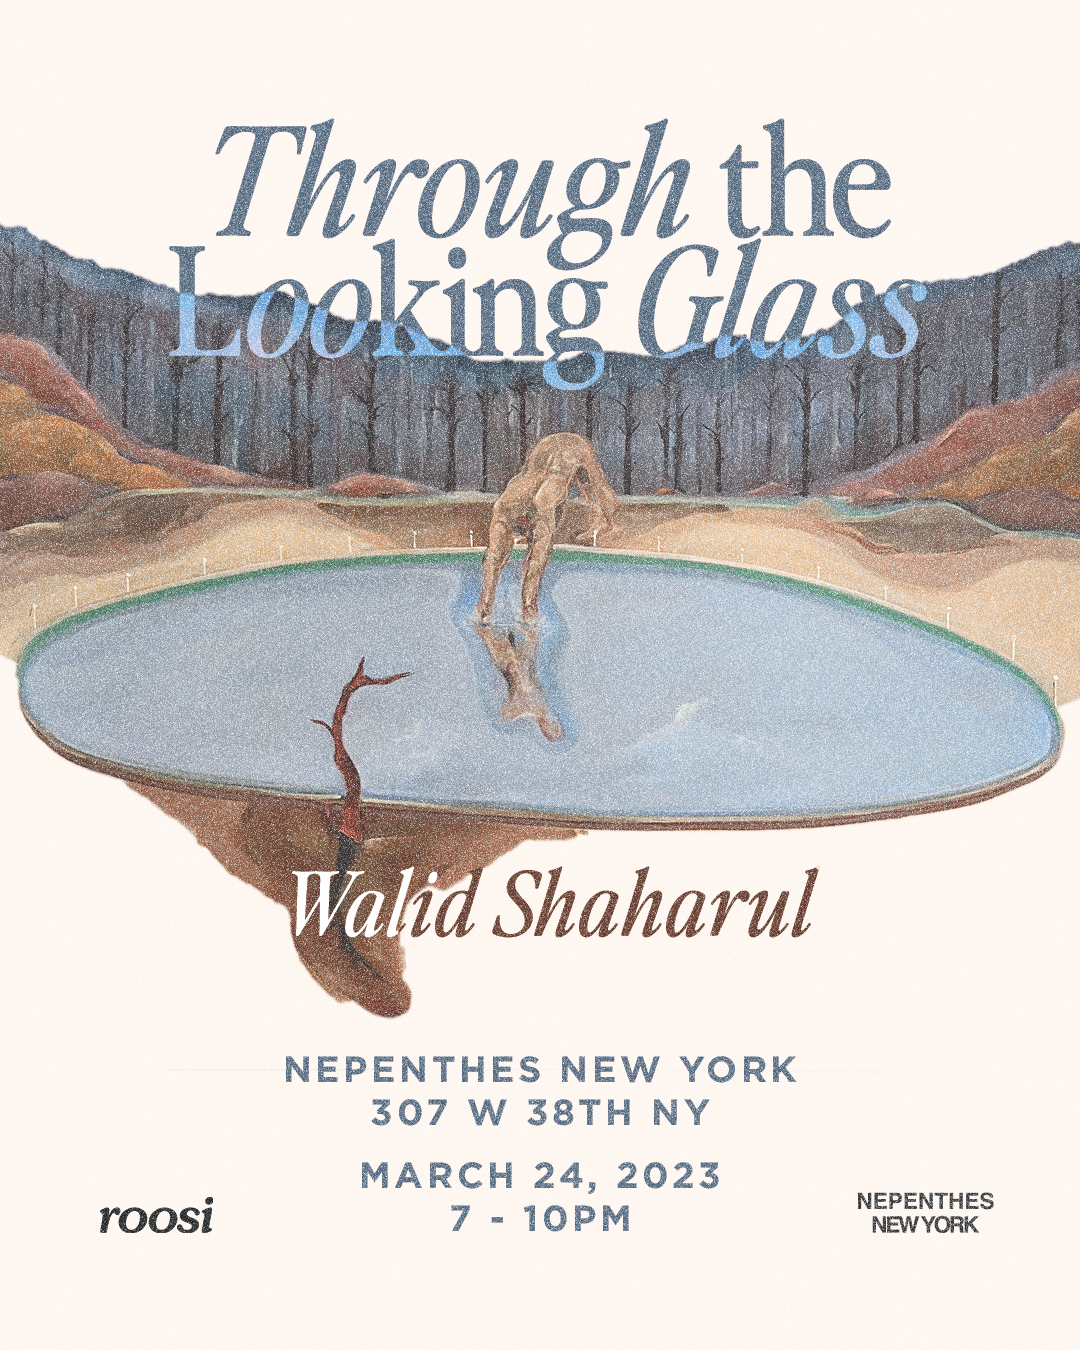 "Through the Looking Glass", by Walid Shaharul - Exhibition at Nepenthes New York